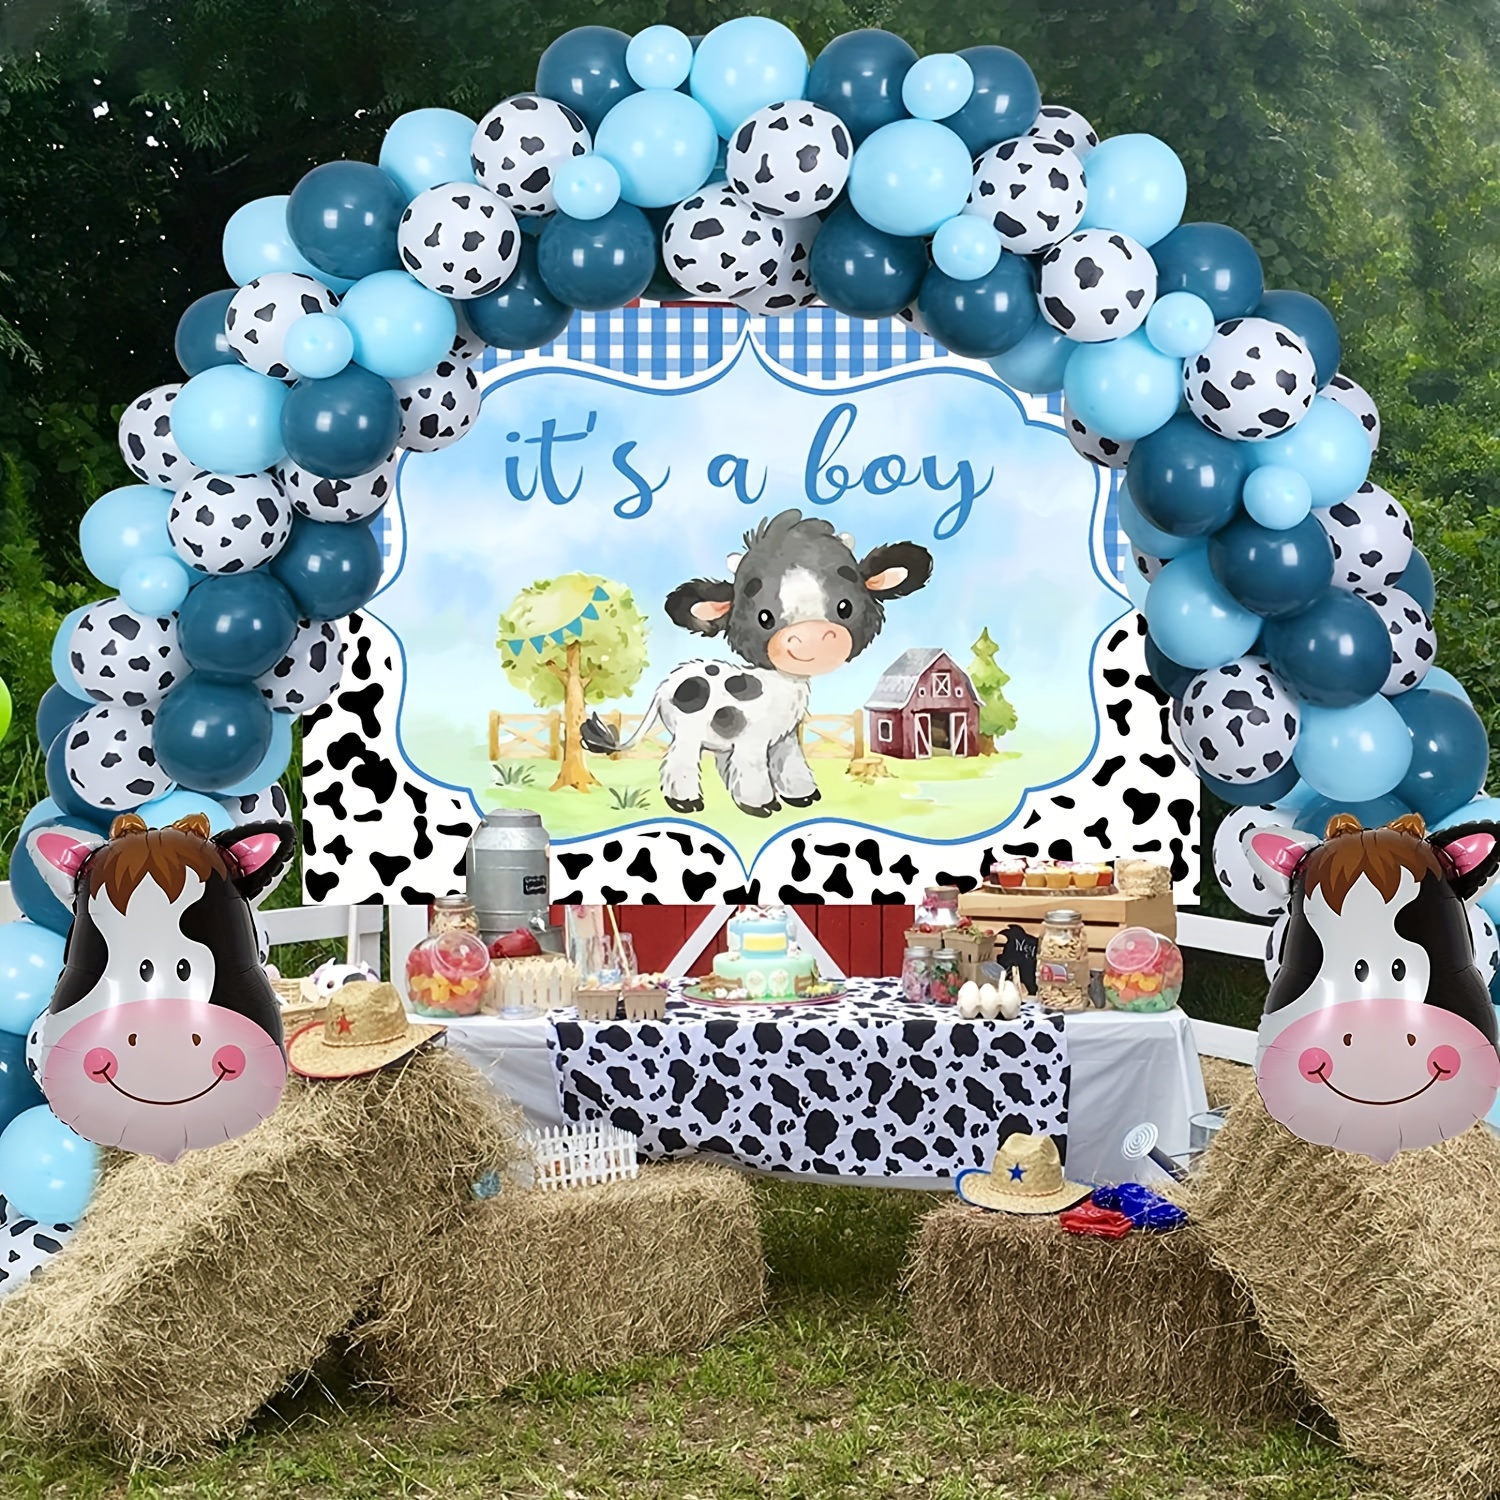  Baby Shower Decorations for Boy, Blue Baby Party Decor